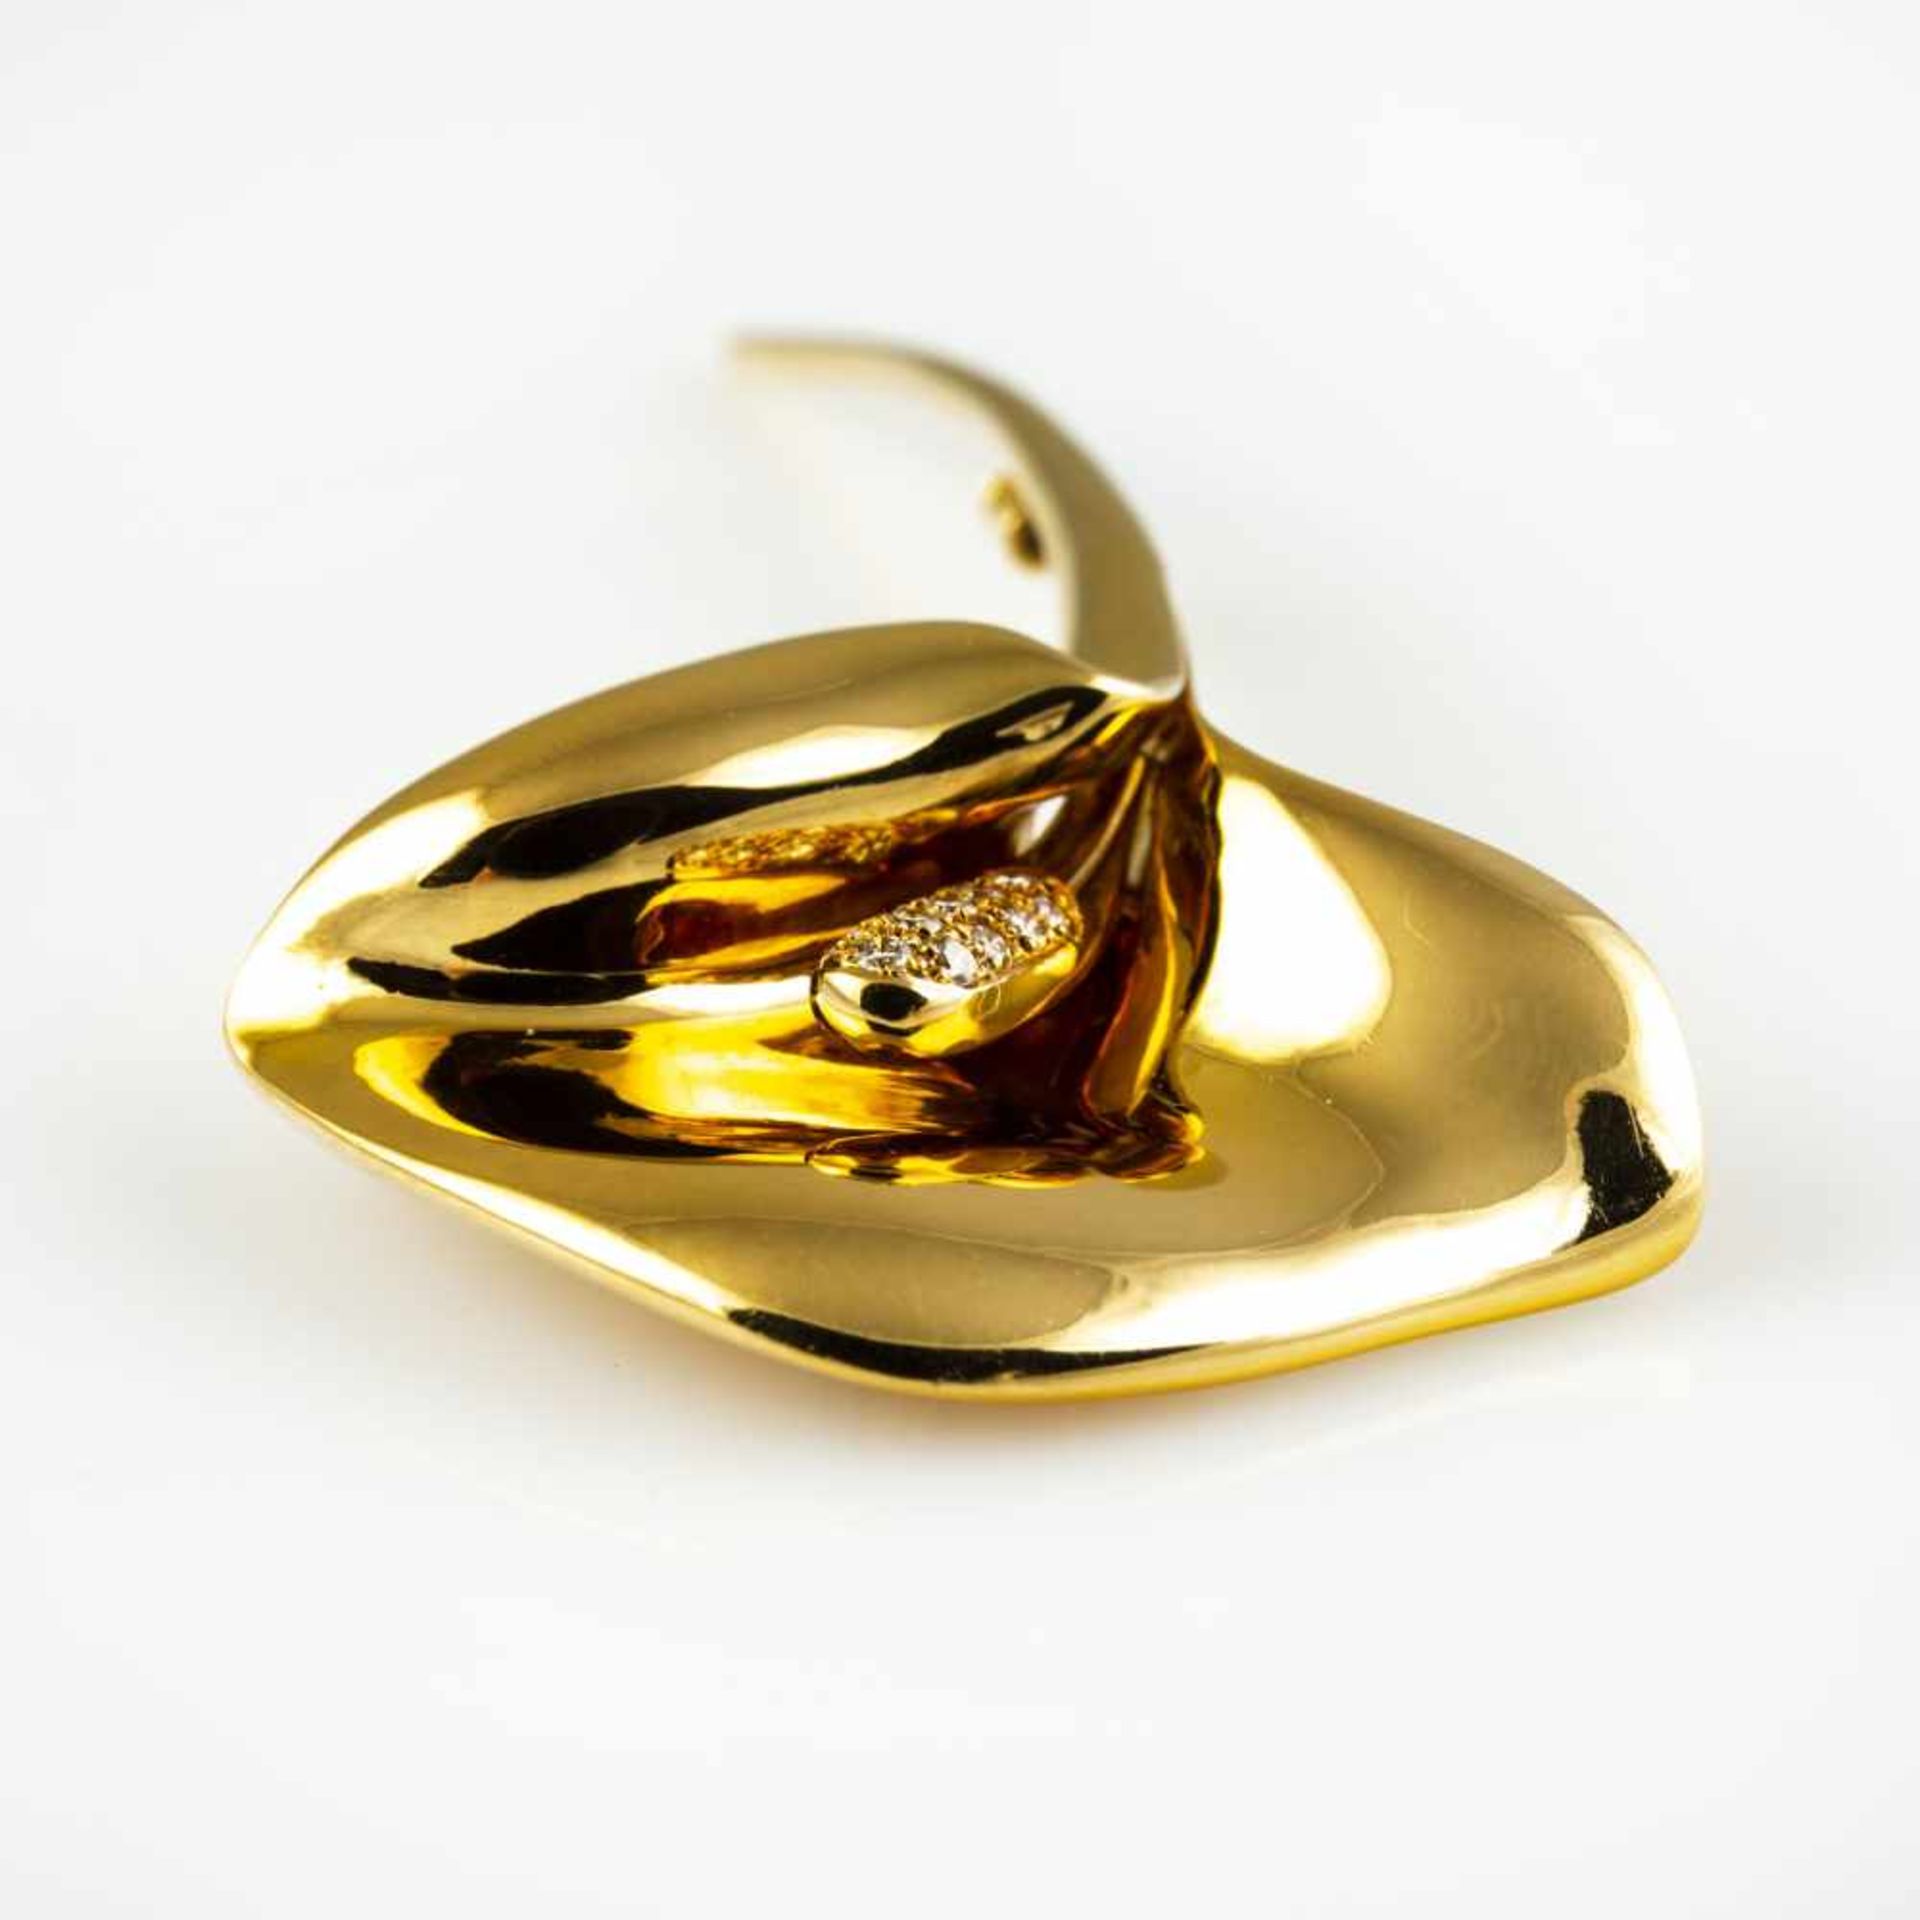 Brooch in the shape of a lily - Image 3 of 4